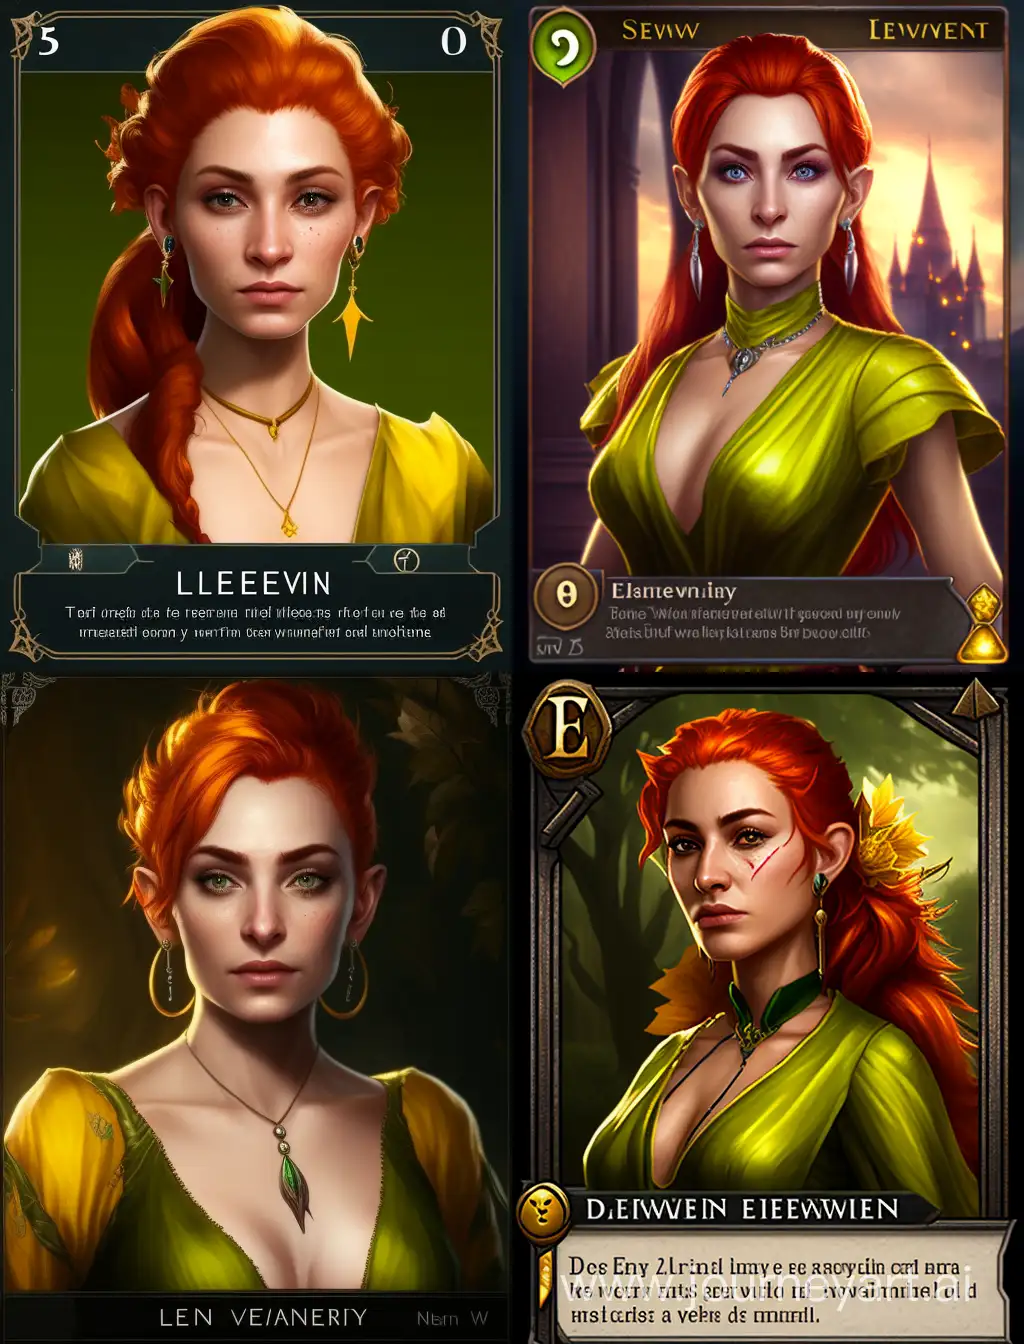 Ida Emean Aep Sivney: Elven features, with pointed Elf ears. Green eyes, flaming red hair.   Wearing a Sleeveless bright yellow gown with a deep plunging V neckline.  No jewellery. Use the Gwent art from the games as inspiration for her.  Create a single waist up realistic portrait of her. 